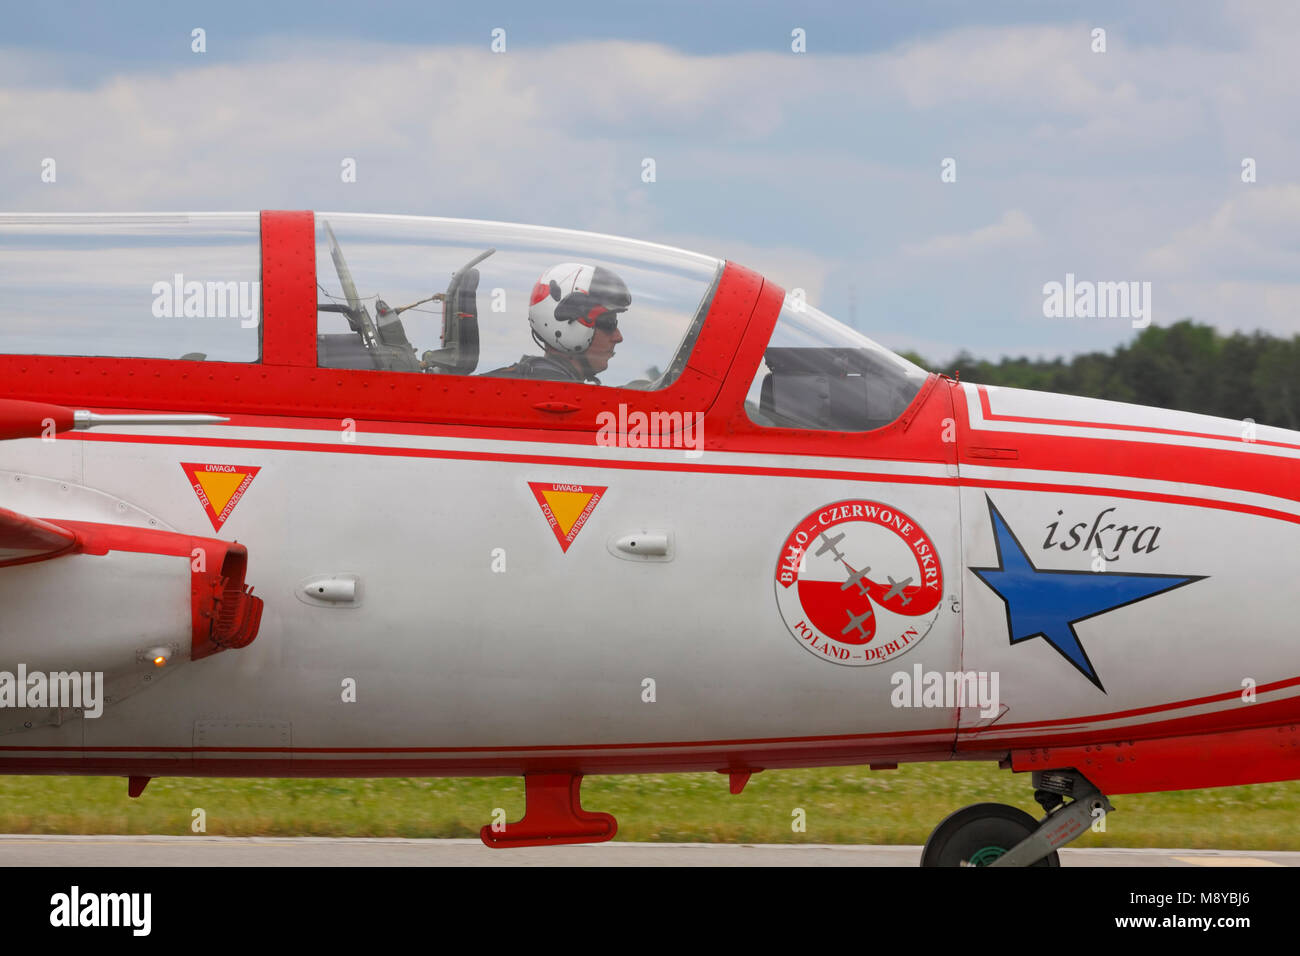 The Polish Air Force TS-11 Iskra MR of White-Red Sparks (Bialo-Czerwone Iskry) aerobatics team during International Air Show. Stock Photo